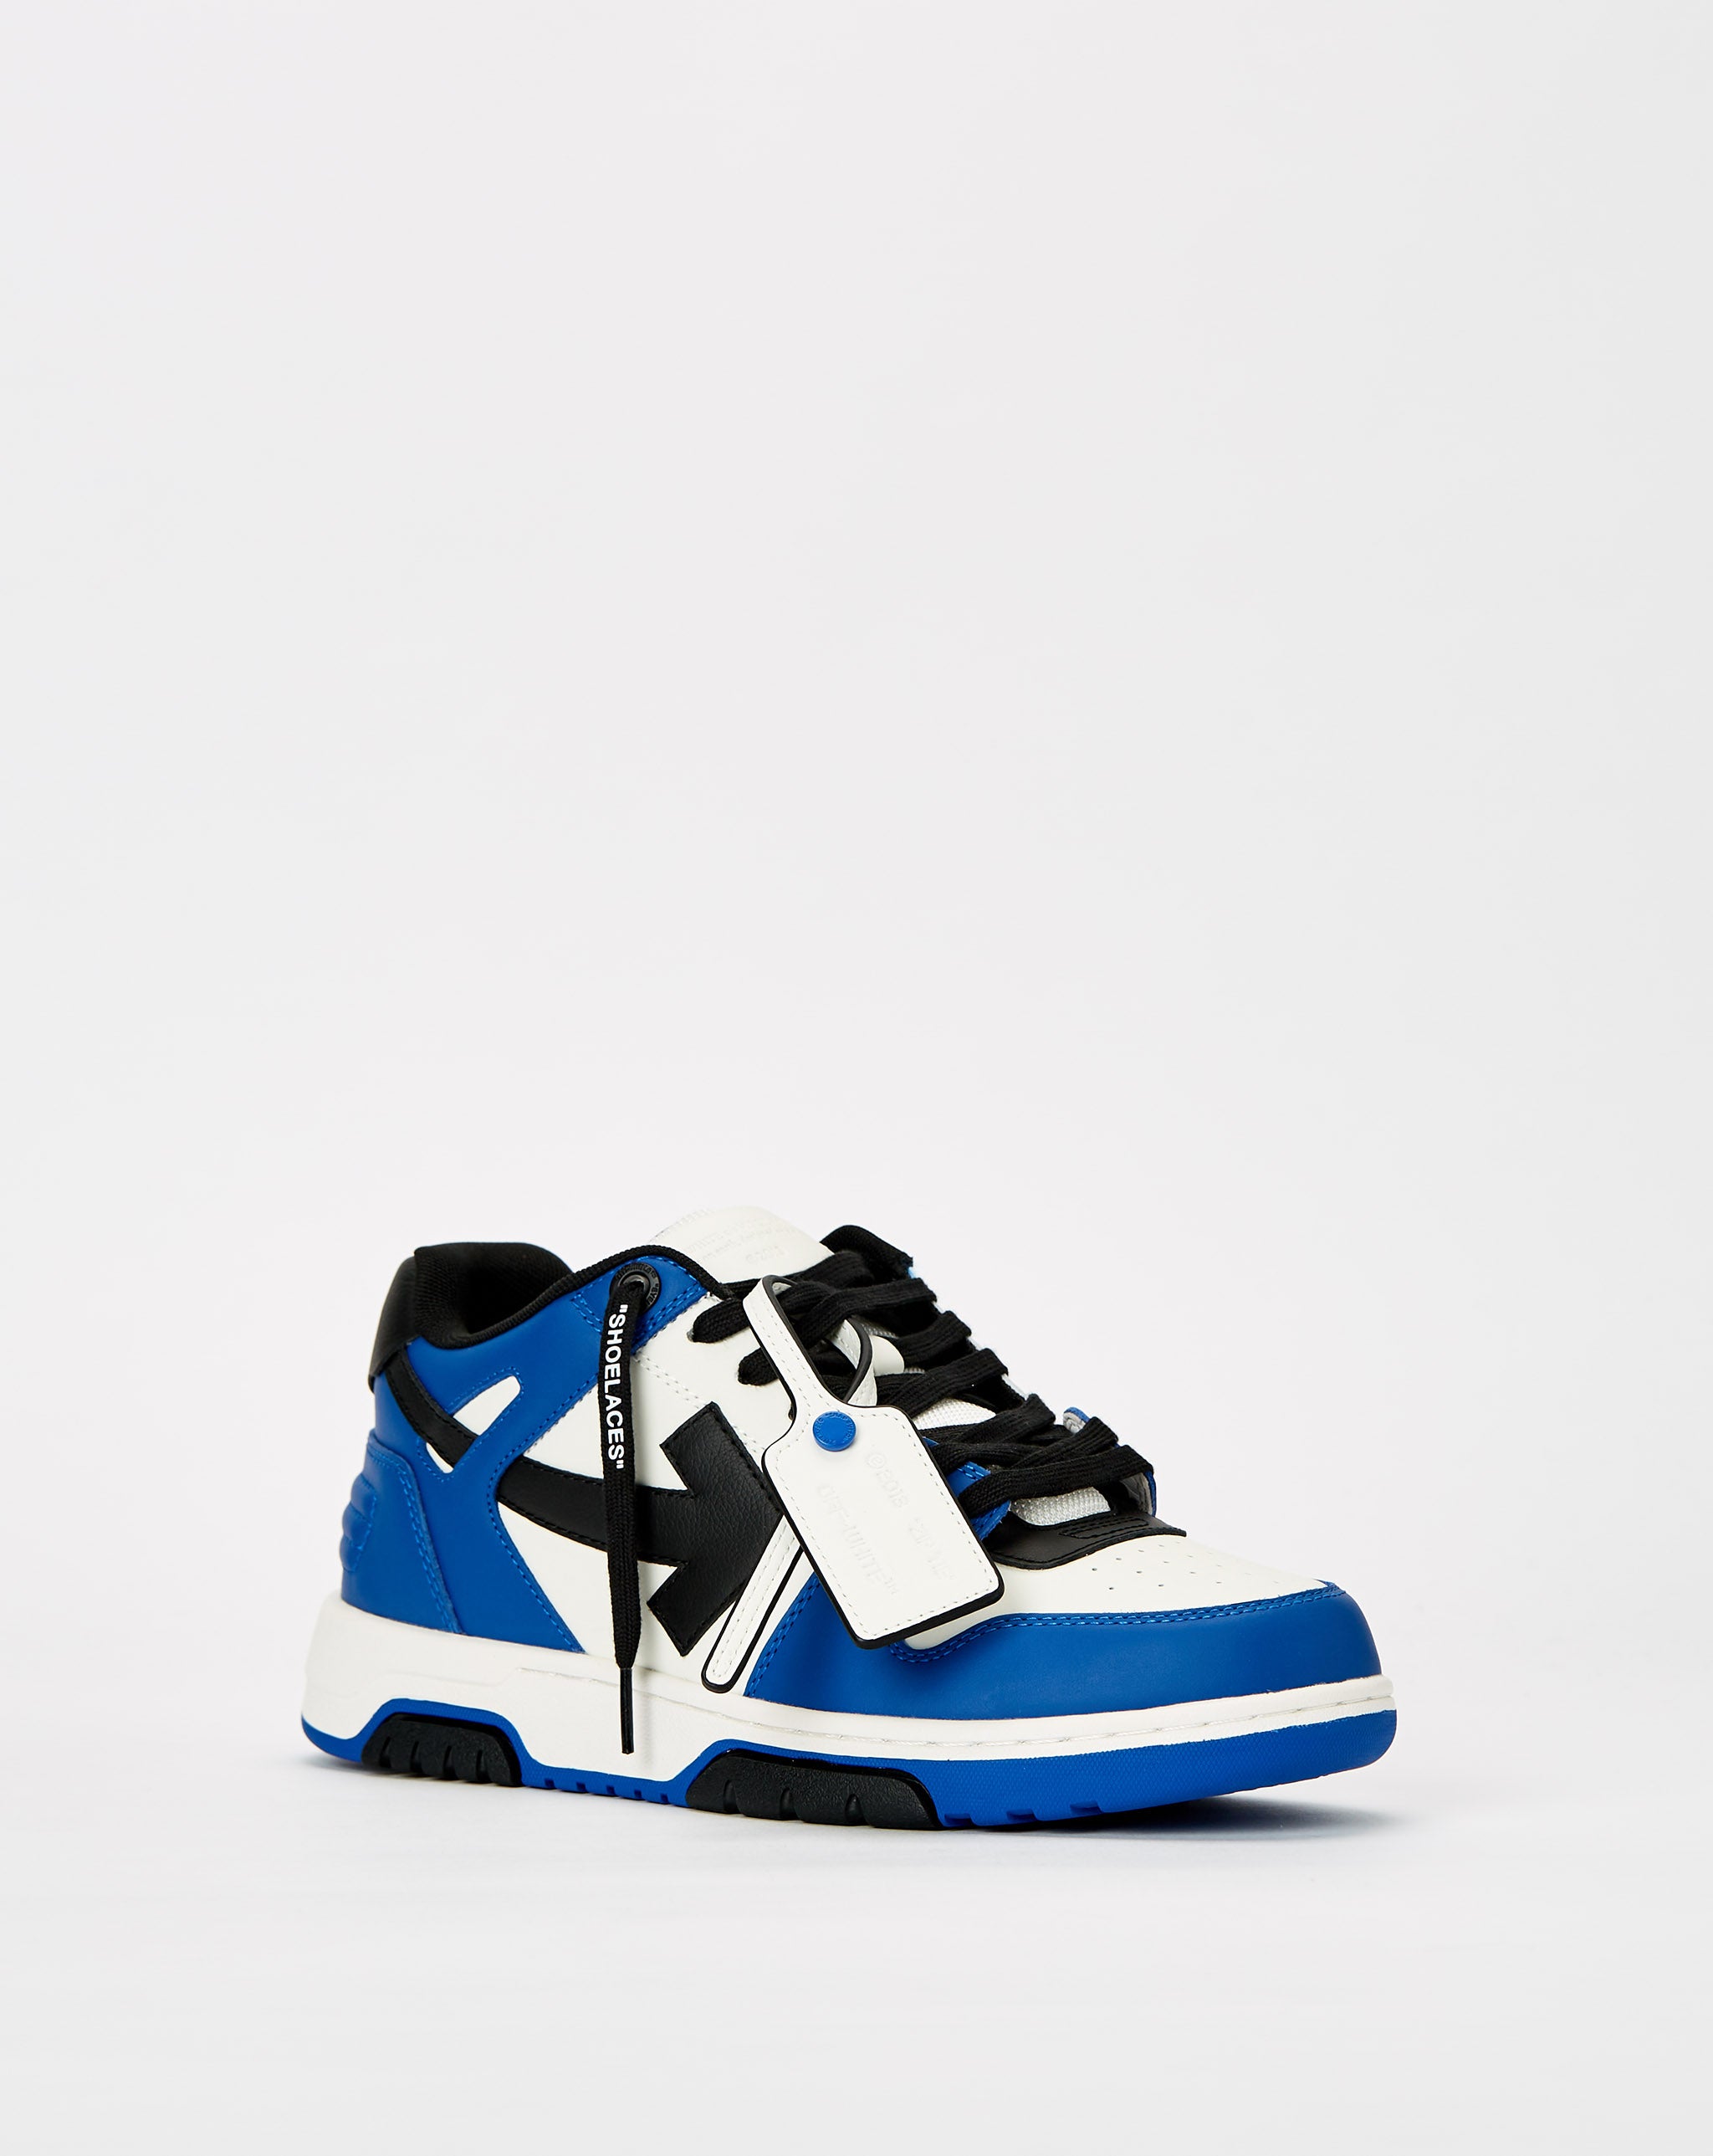 Off-White Out Of Office Calf Leather  - Cheap Urlfreeze Jordan outlet